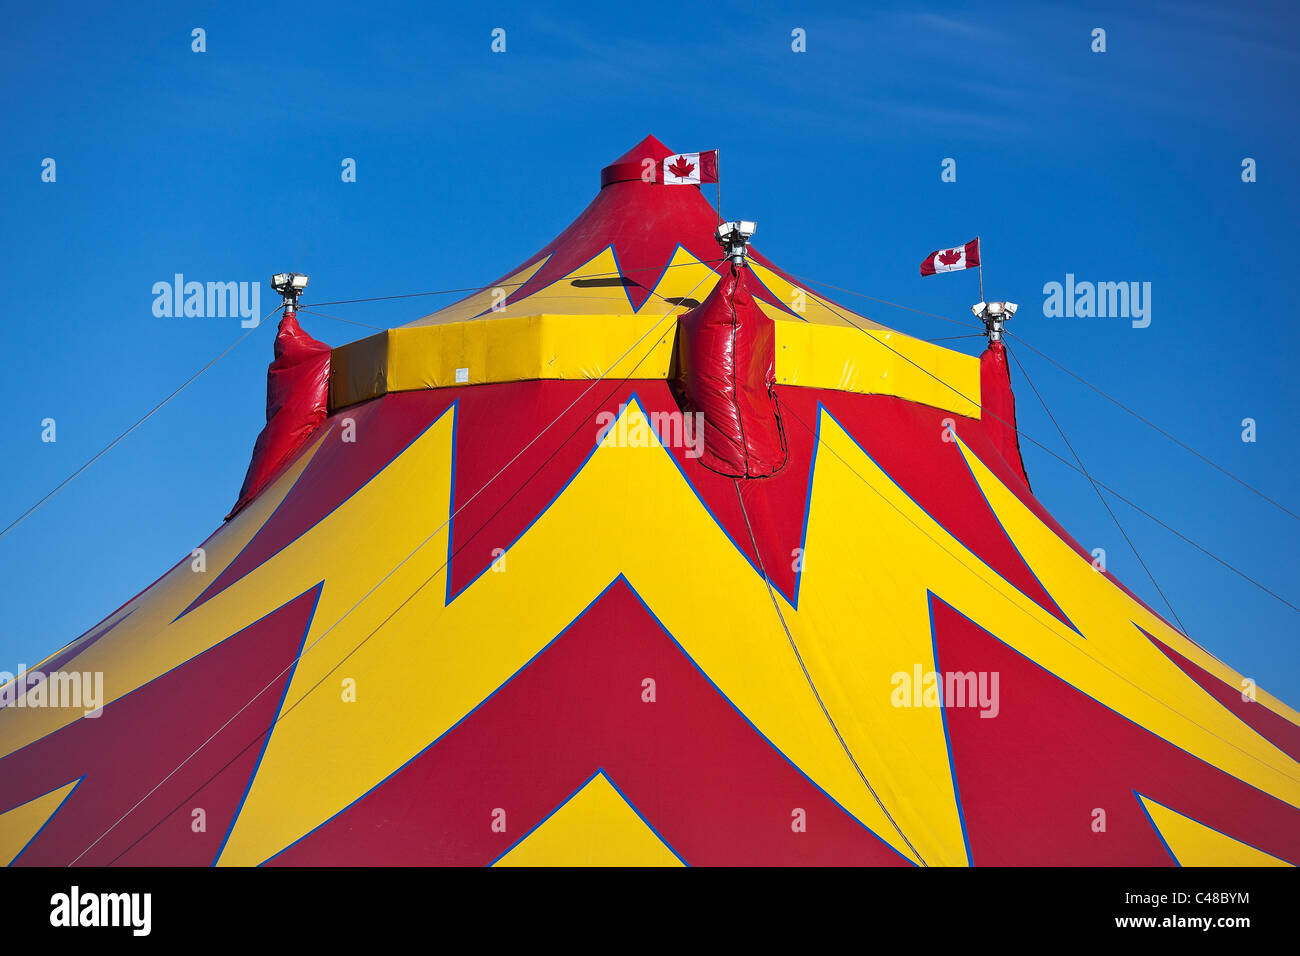 Colorful circus tent. Stock Photo